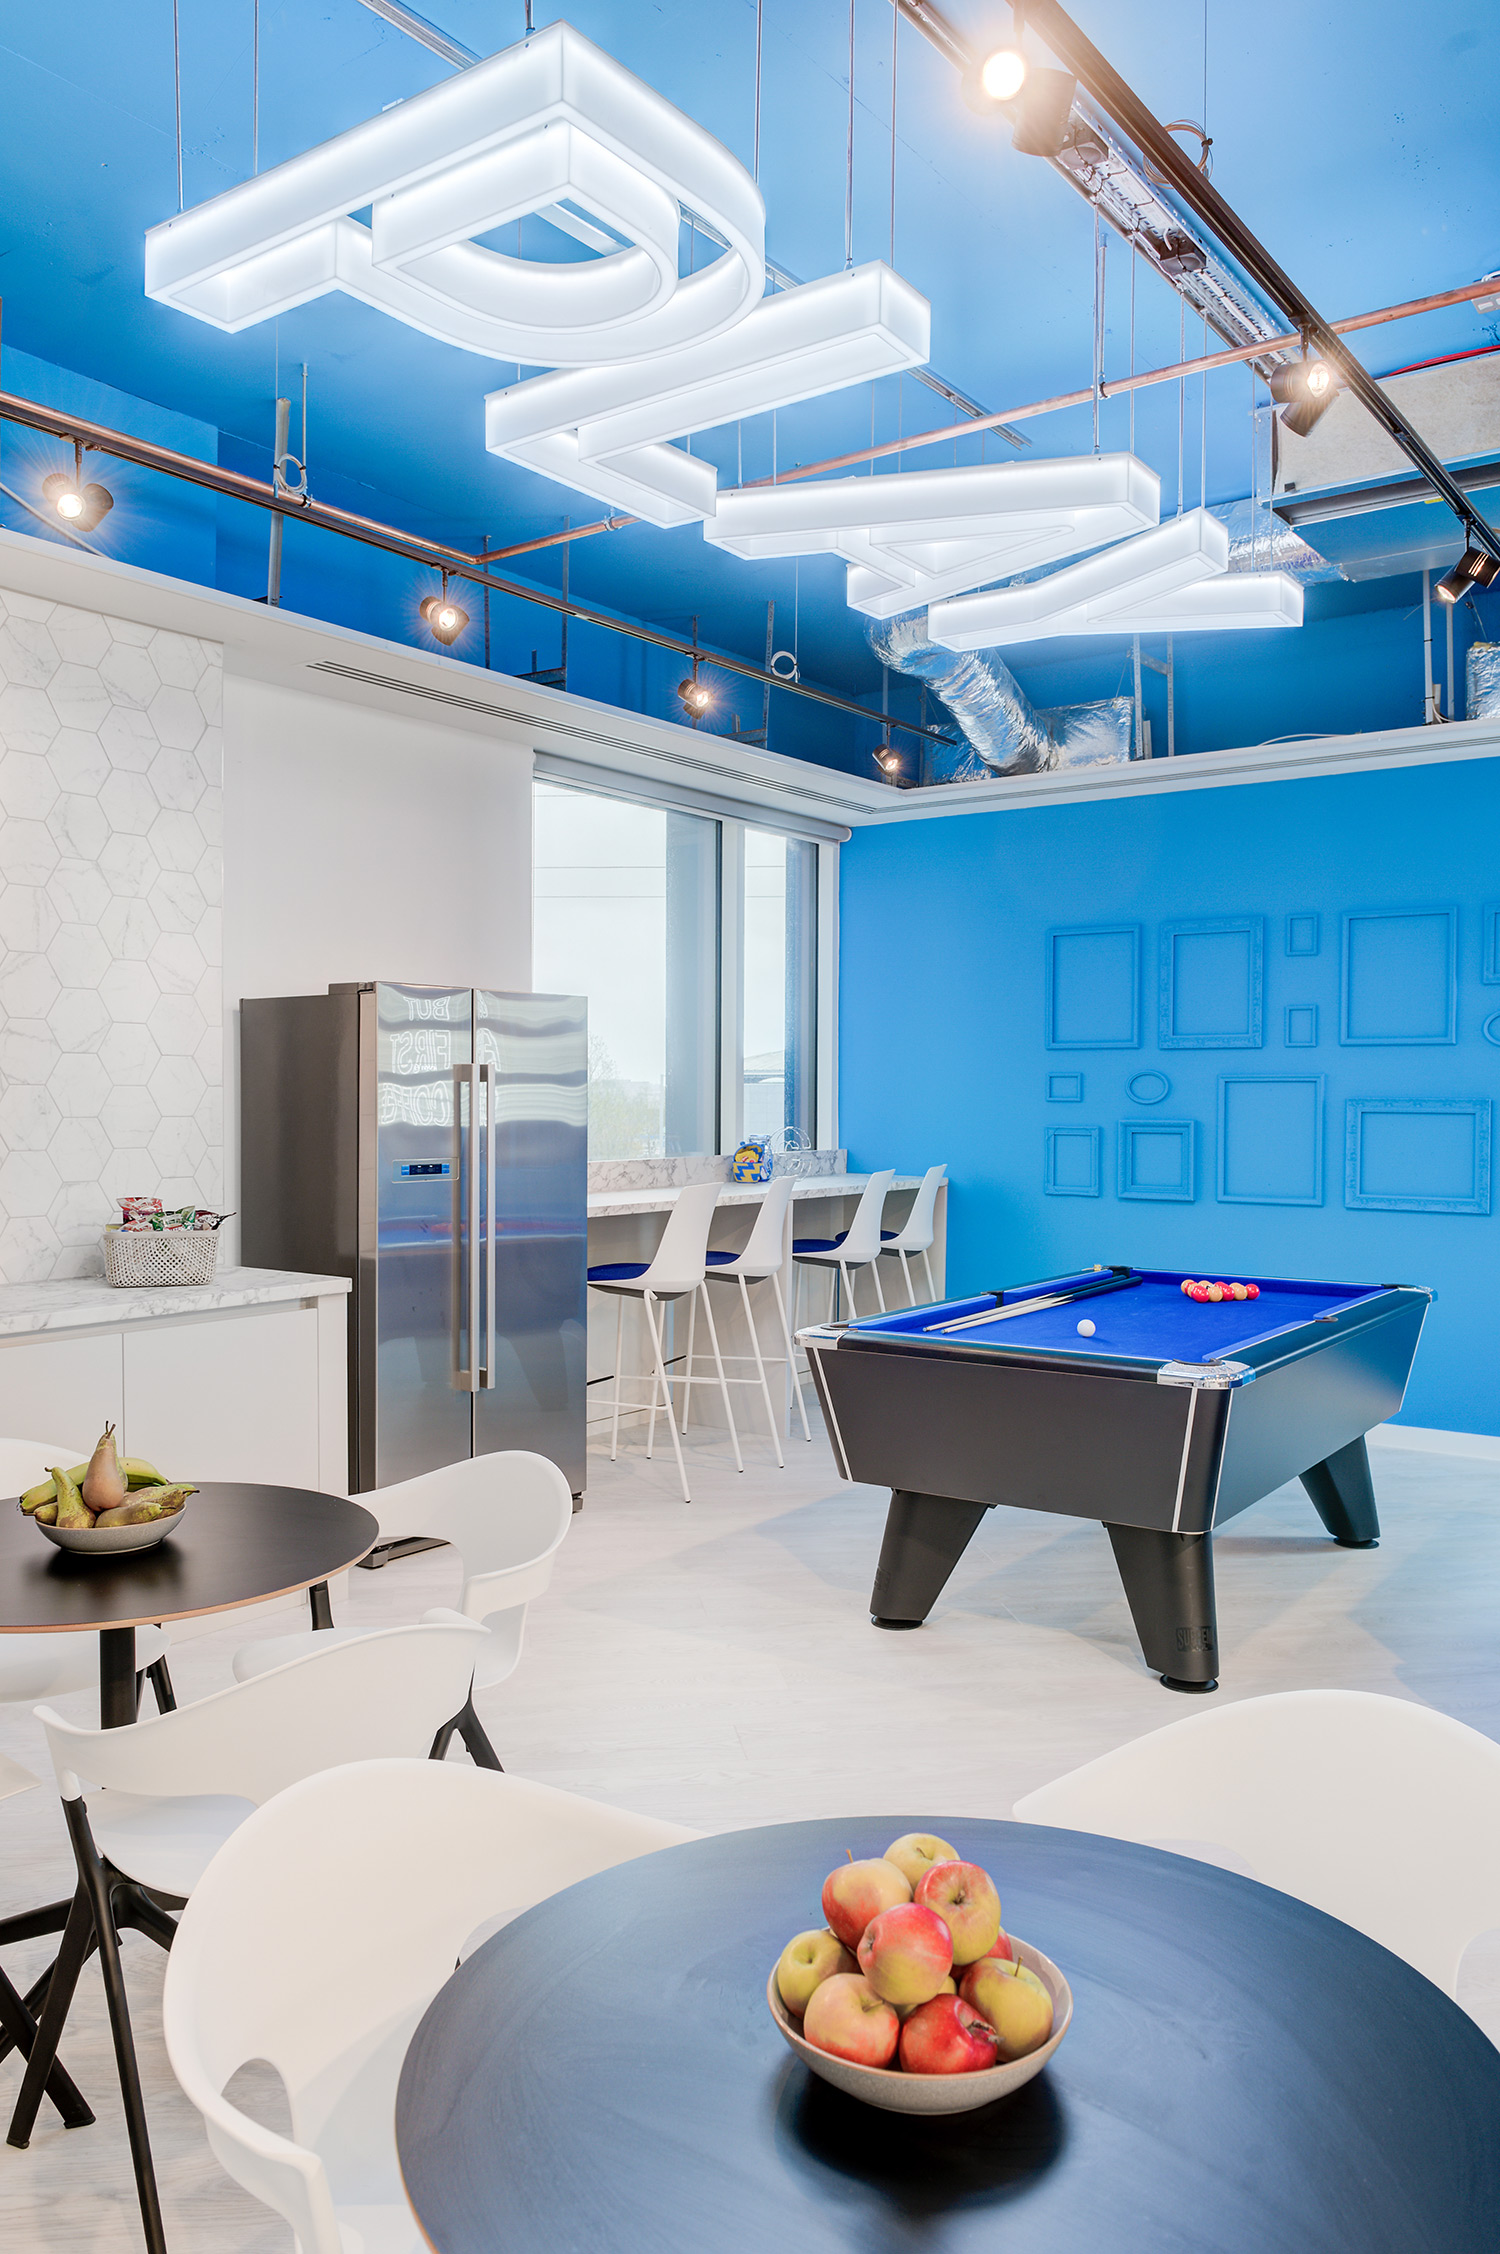 Cambrionix Office Fit-Out Spacio